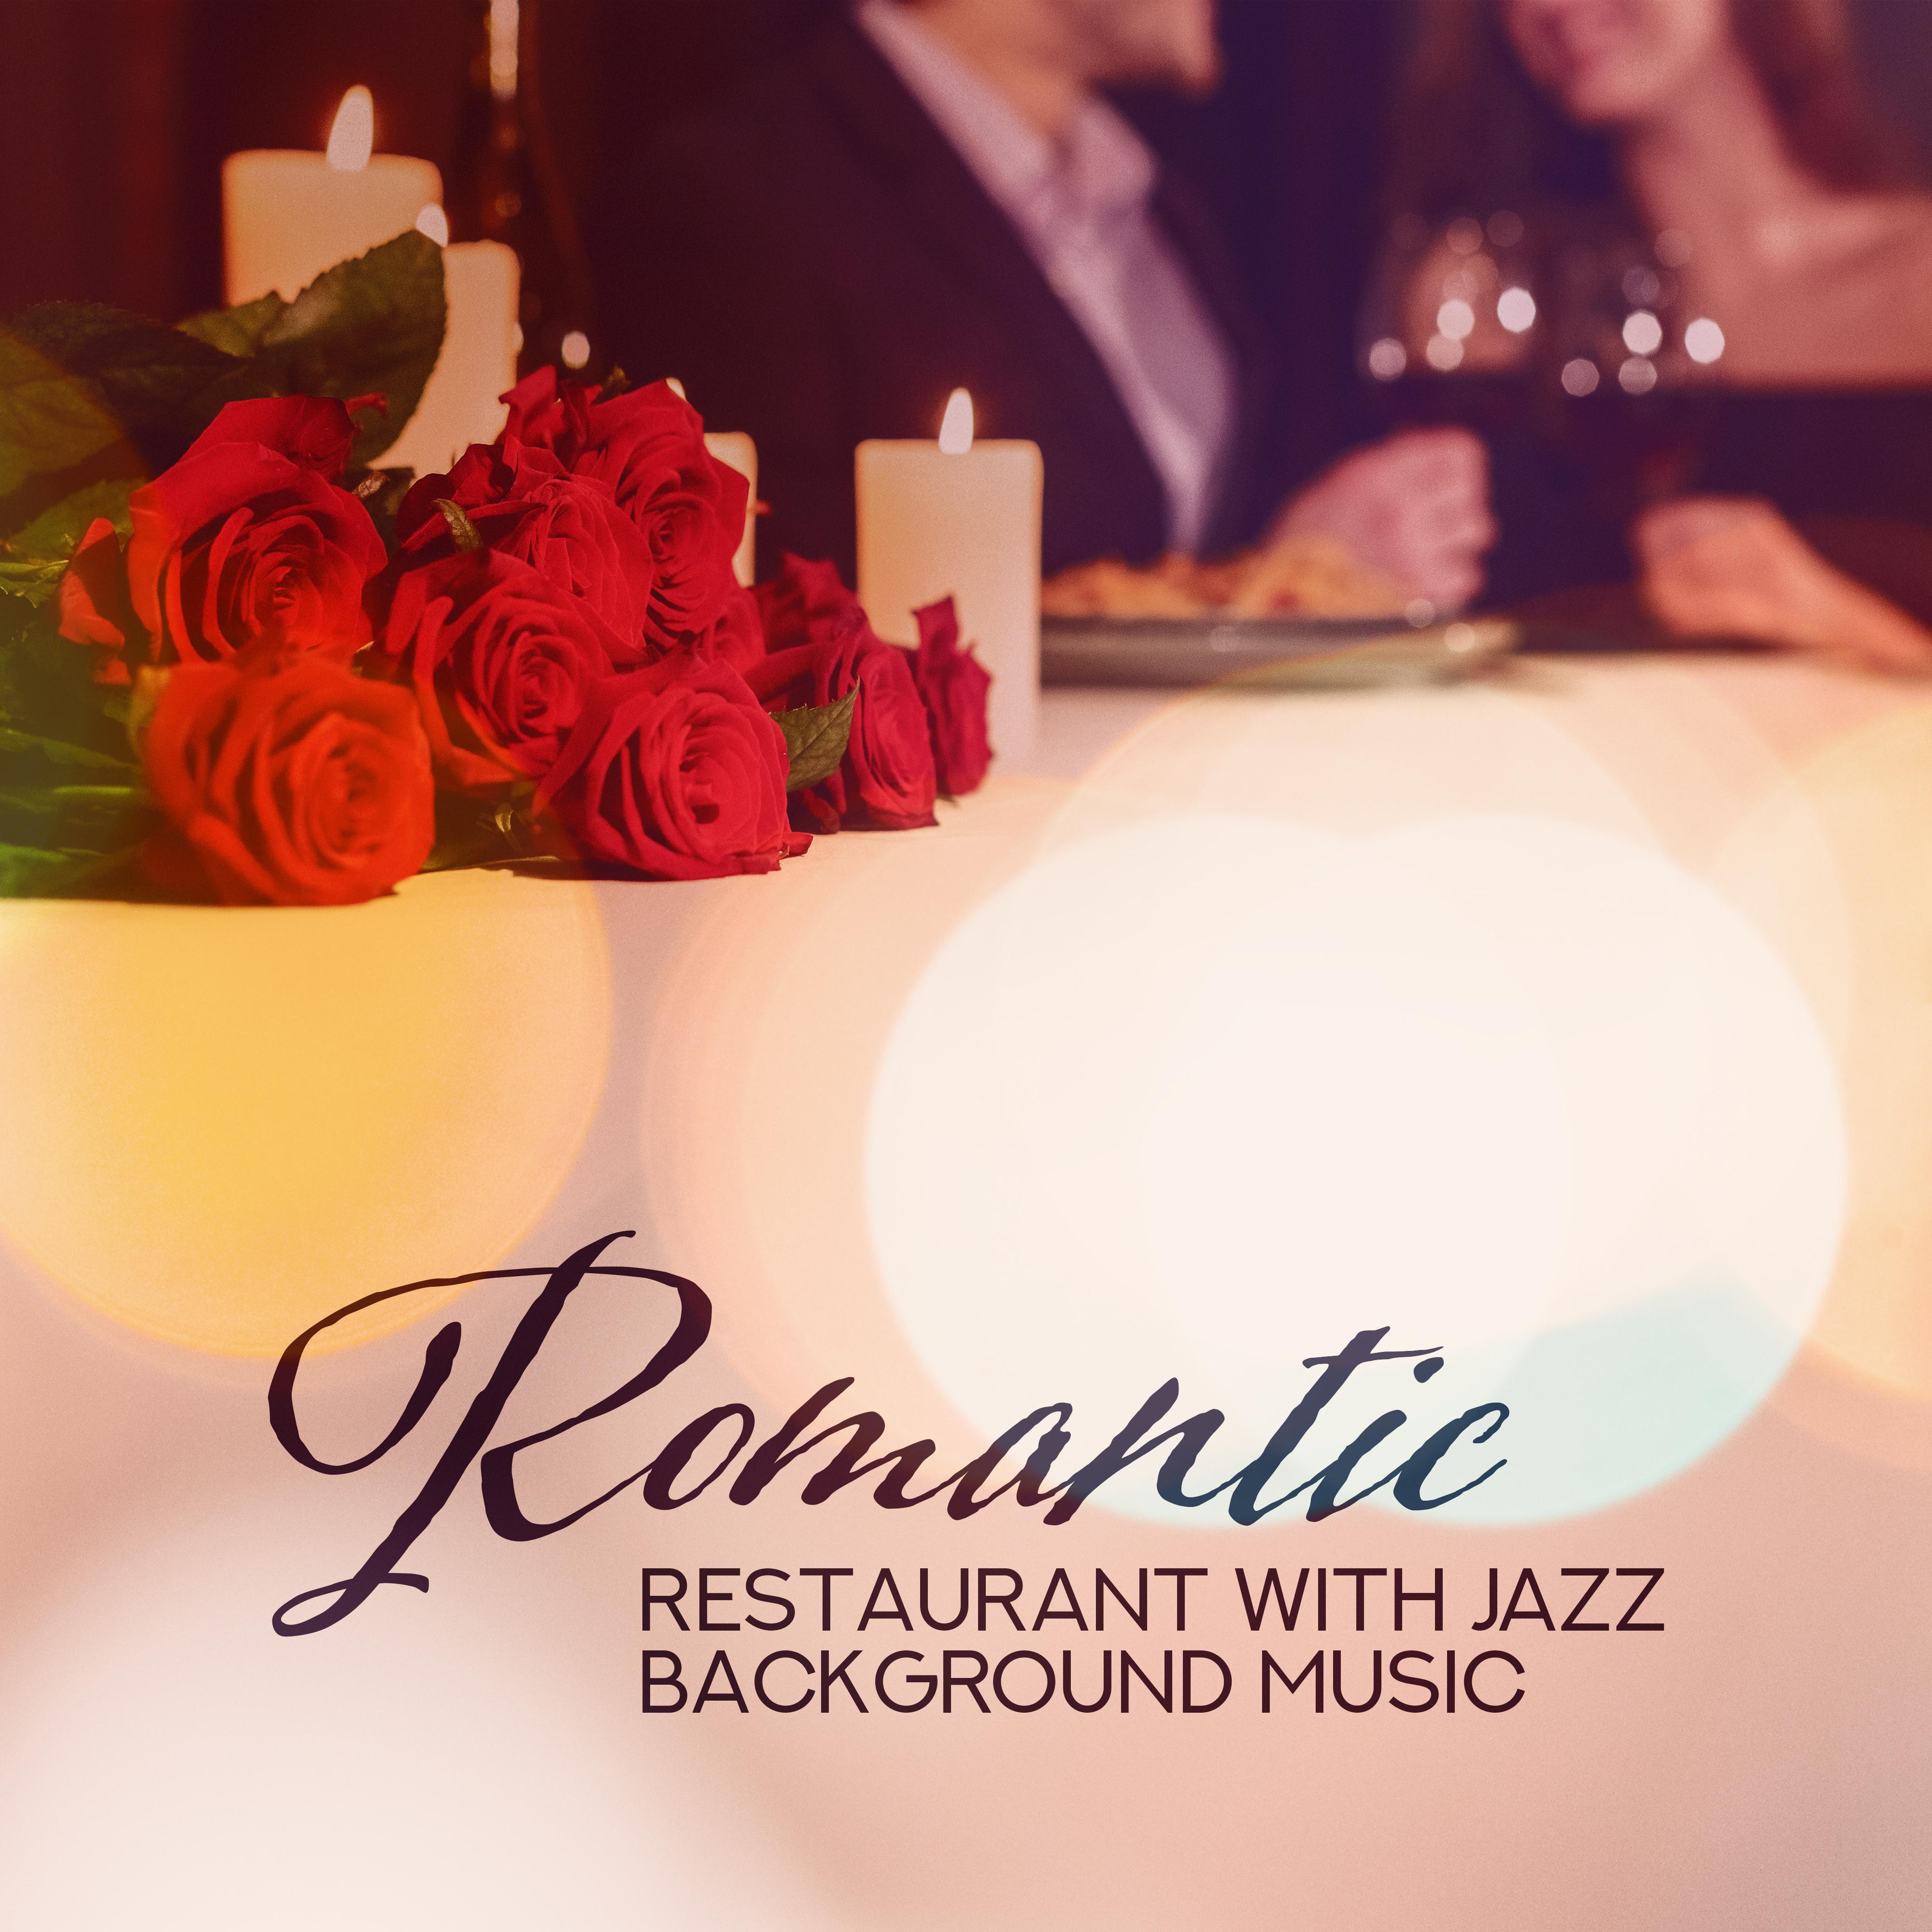 Beautiful Piano Music to Rest – Instrumental Melodies, Pure Relaxation, Soft Jazz at Night, Romantic Jazz, Piano Relaxation